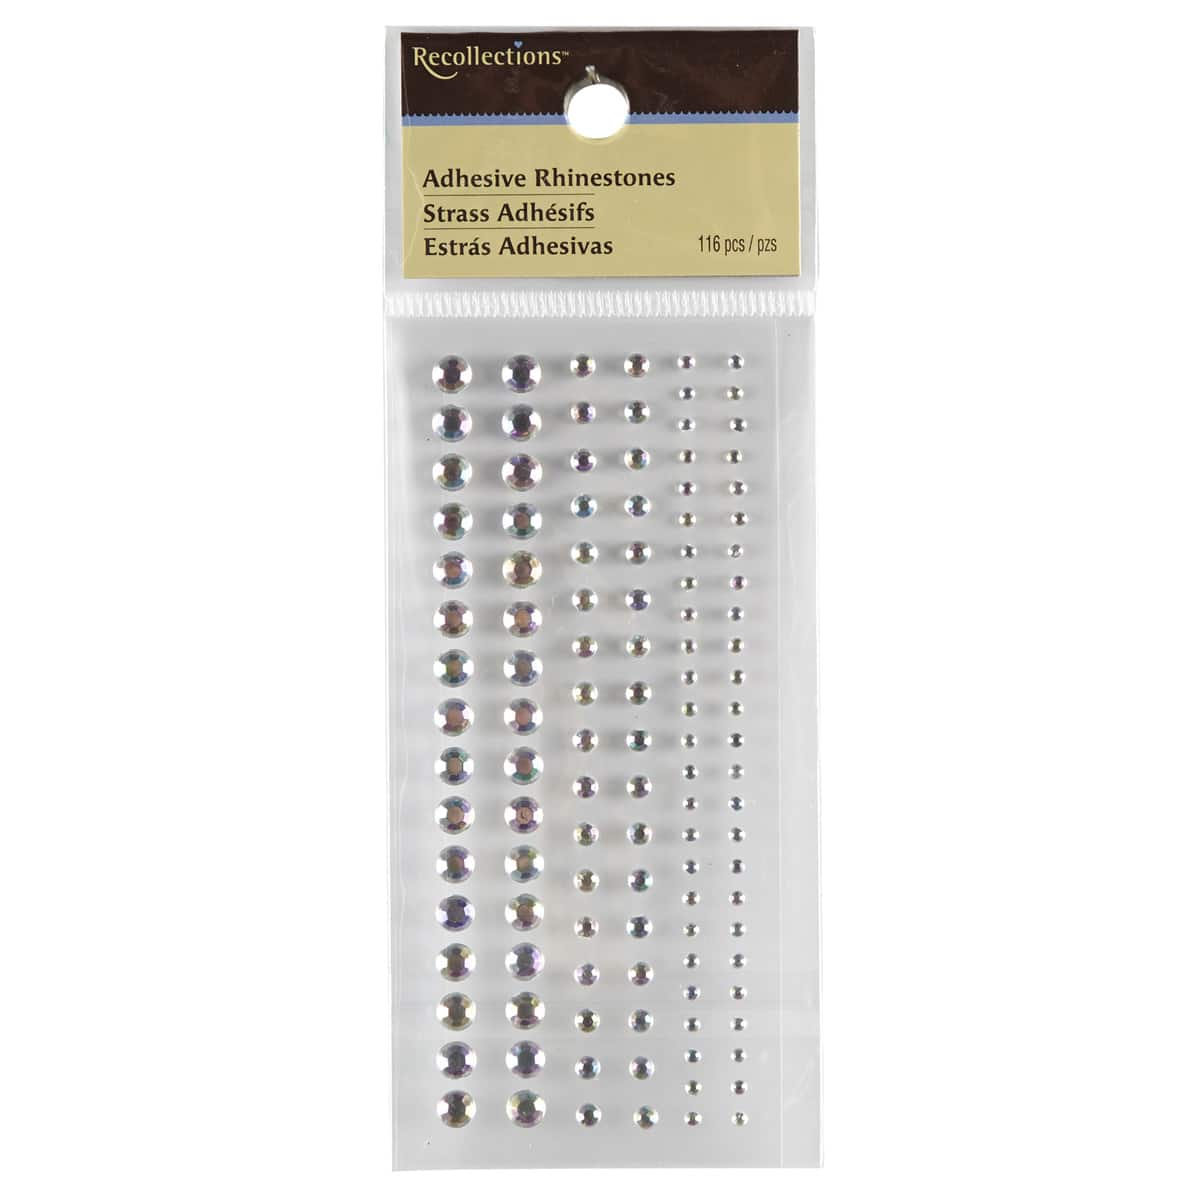 12 Pack: Adhesive Rhinestones Mixed Pack by Recollections